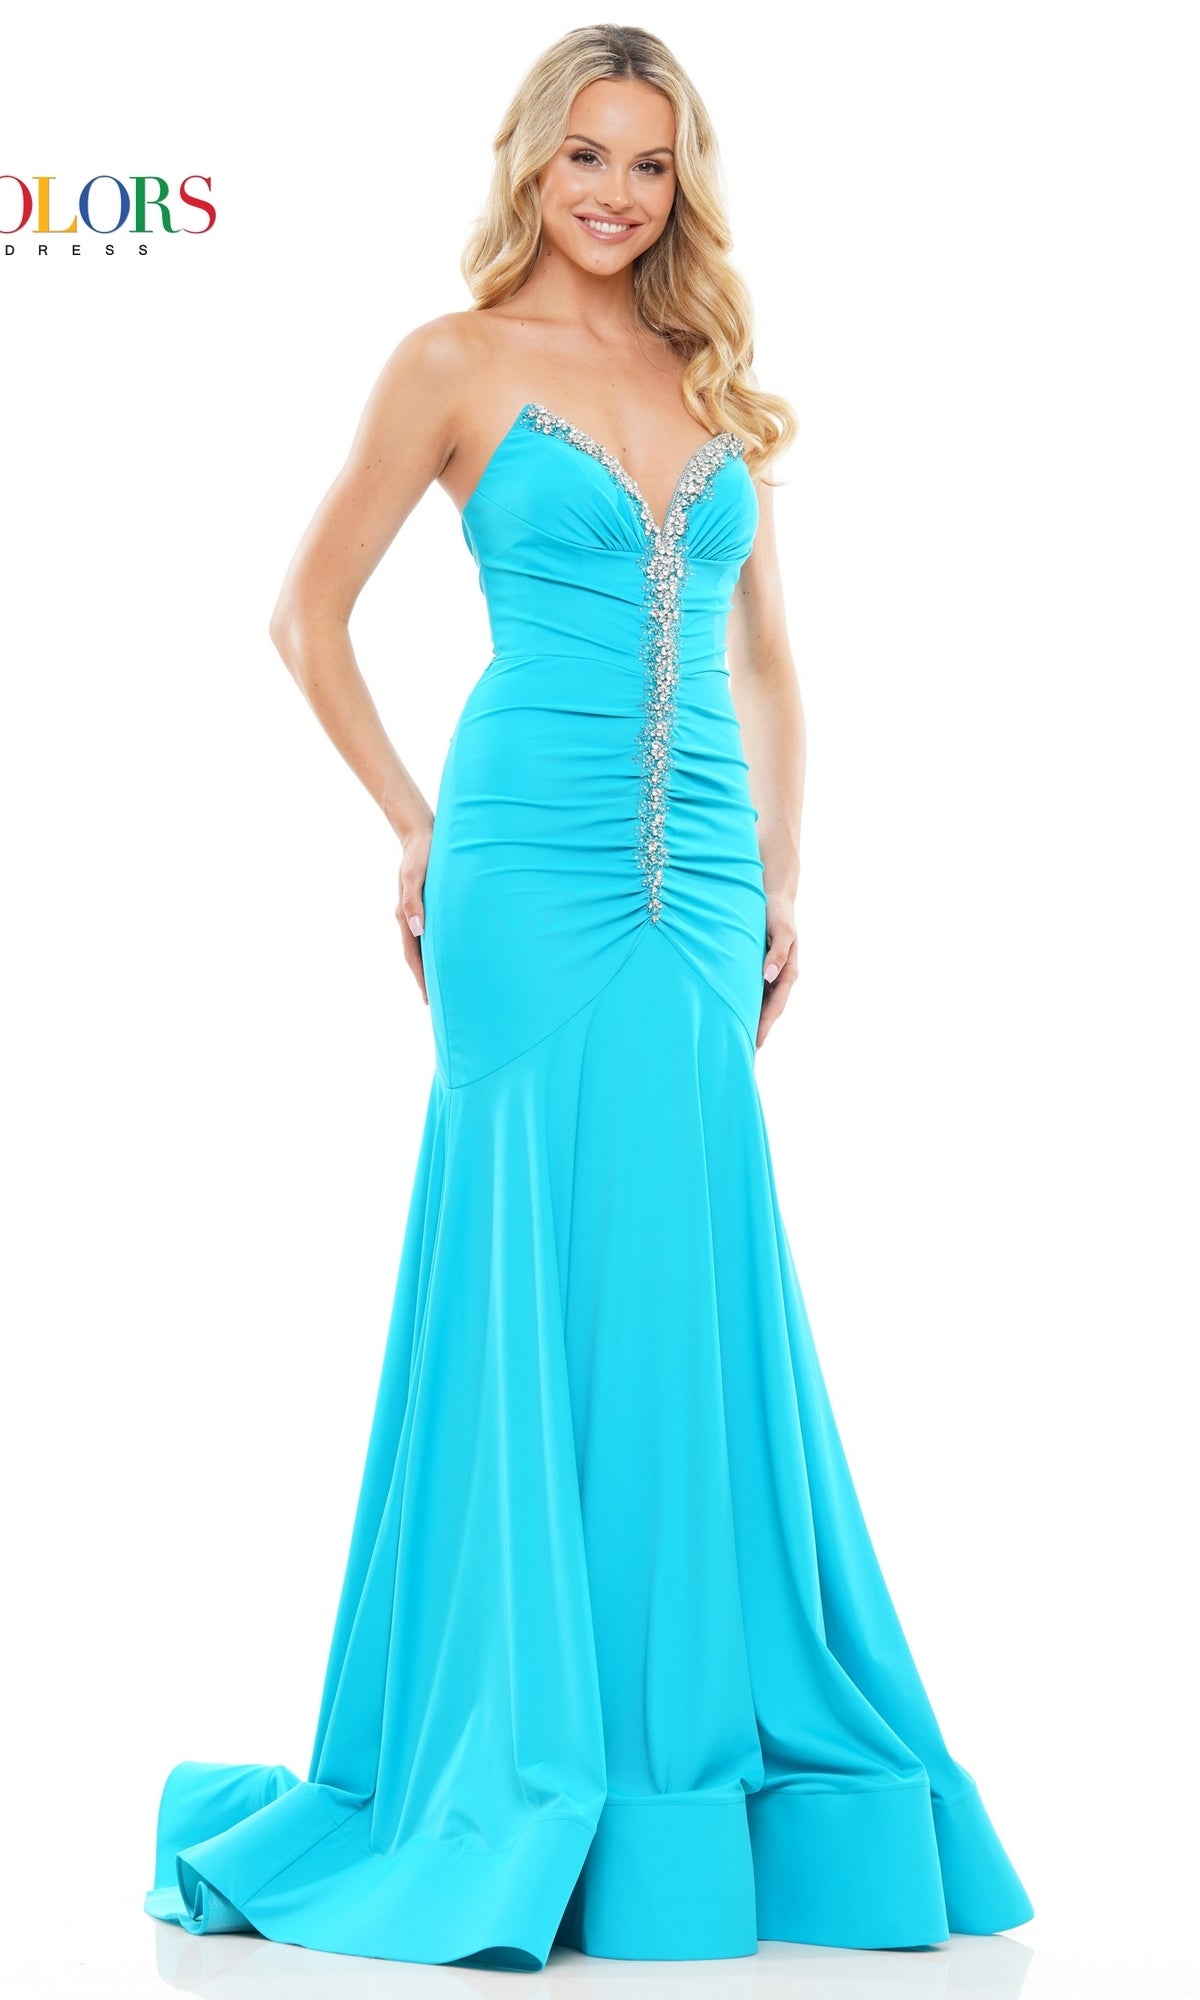 Strapless Ruched Long Prom Dress 3276 by Colors Dress